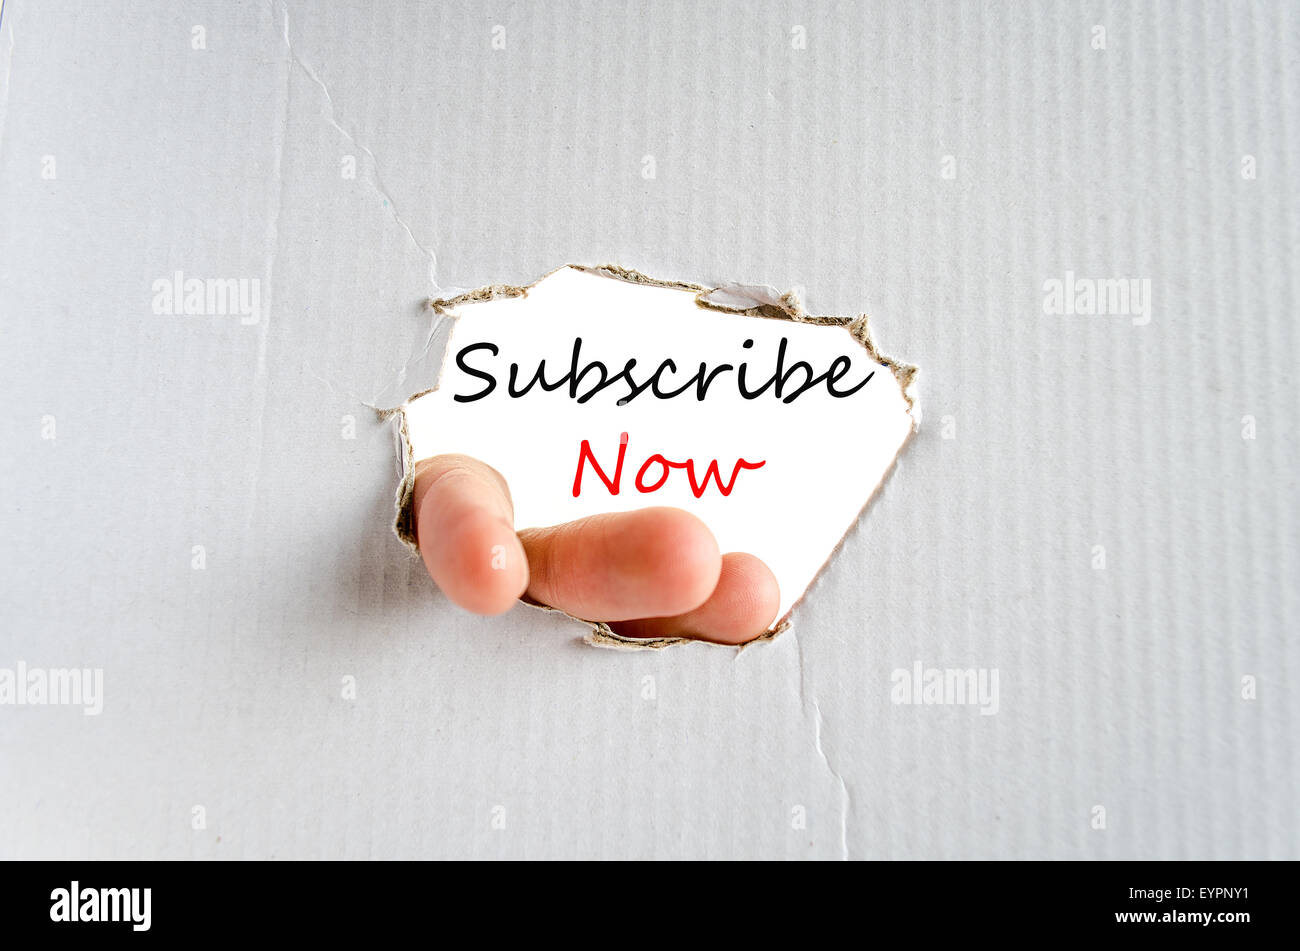 Subscribe now hand concept isolated over white background Stock Photo